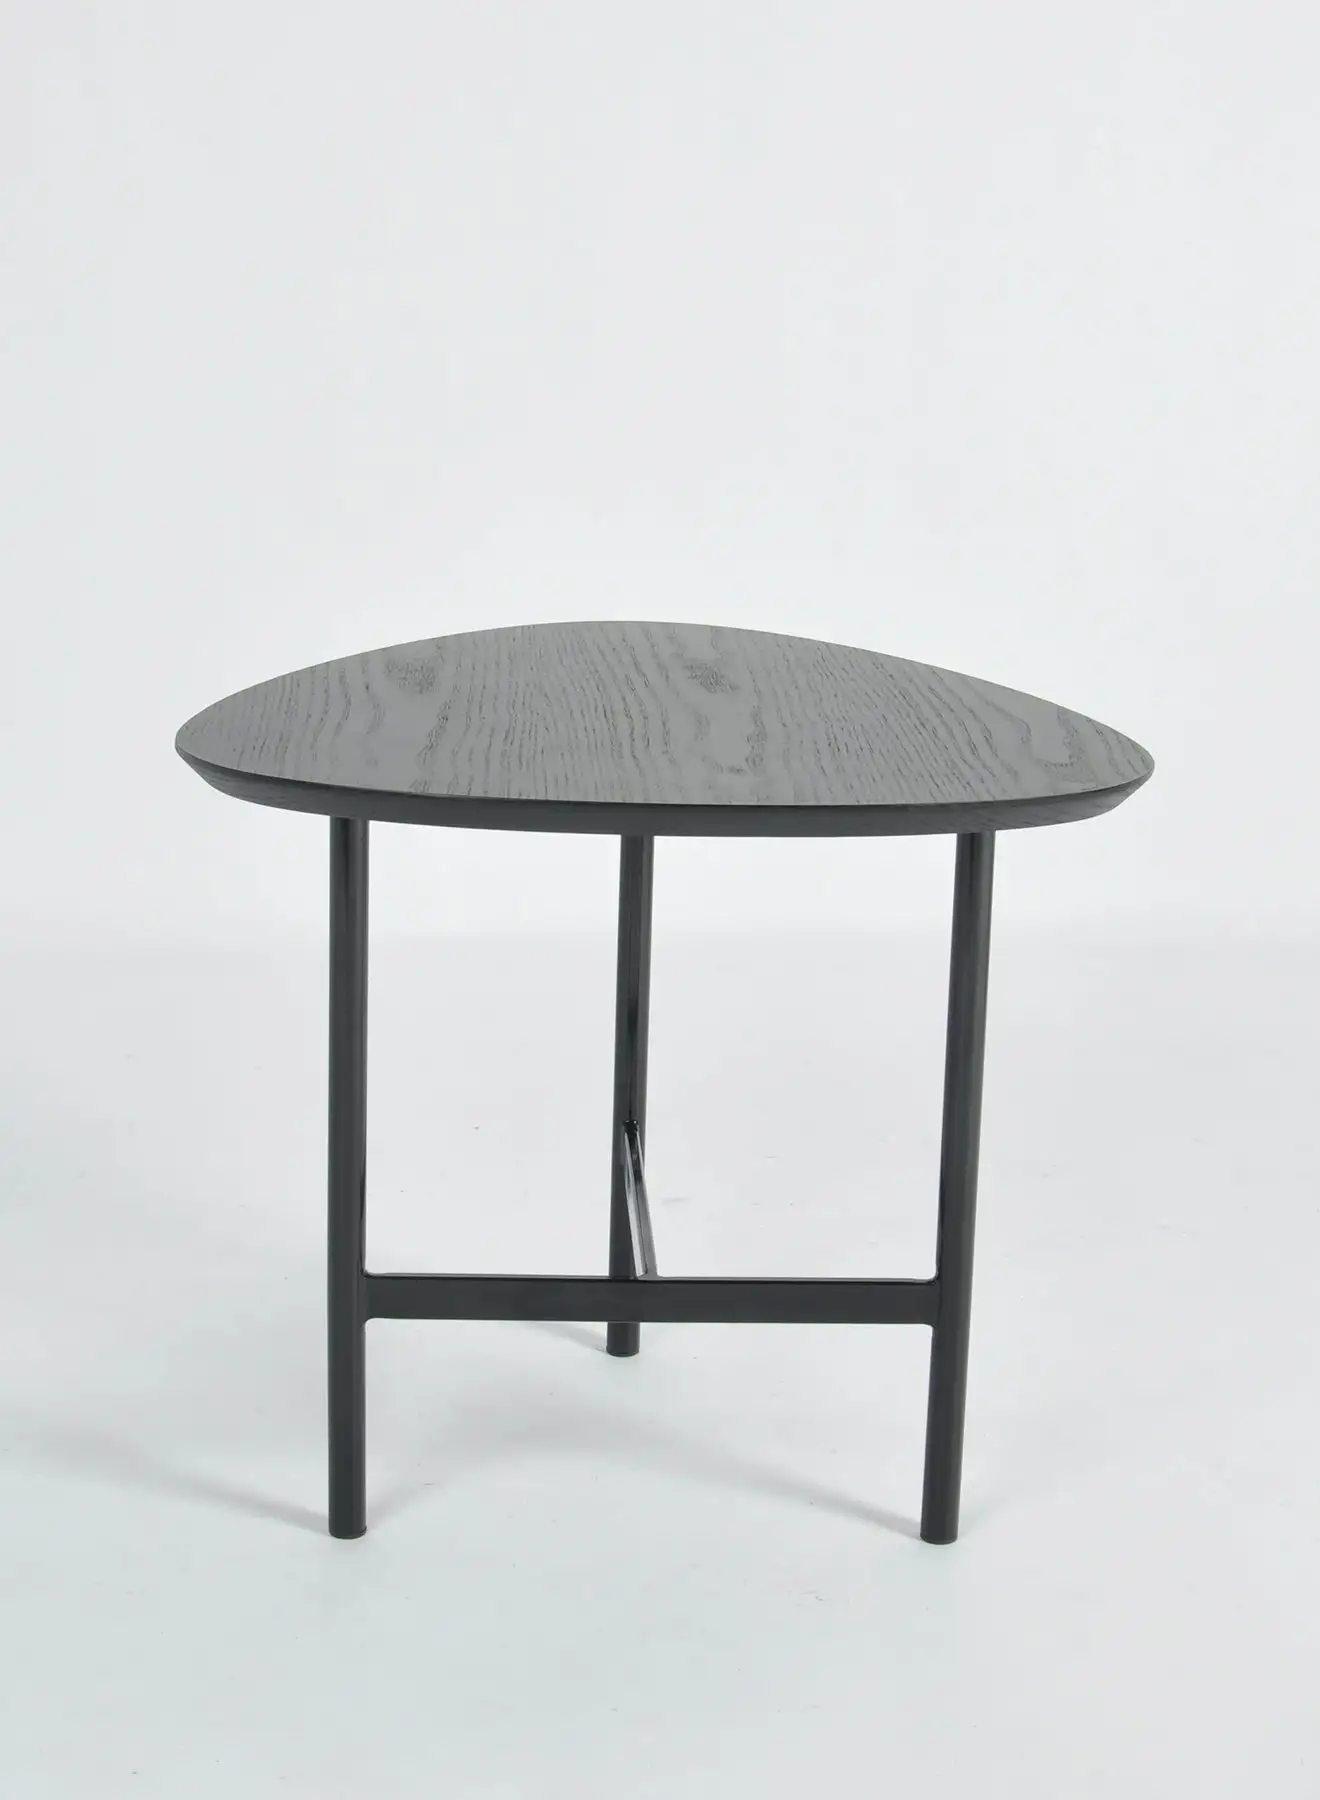 Switch Coffee Table Used As Coffee Corner And Side Table In Black Wood - Size 64X62X43